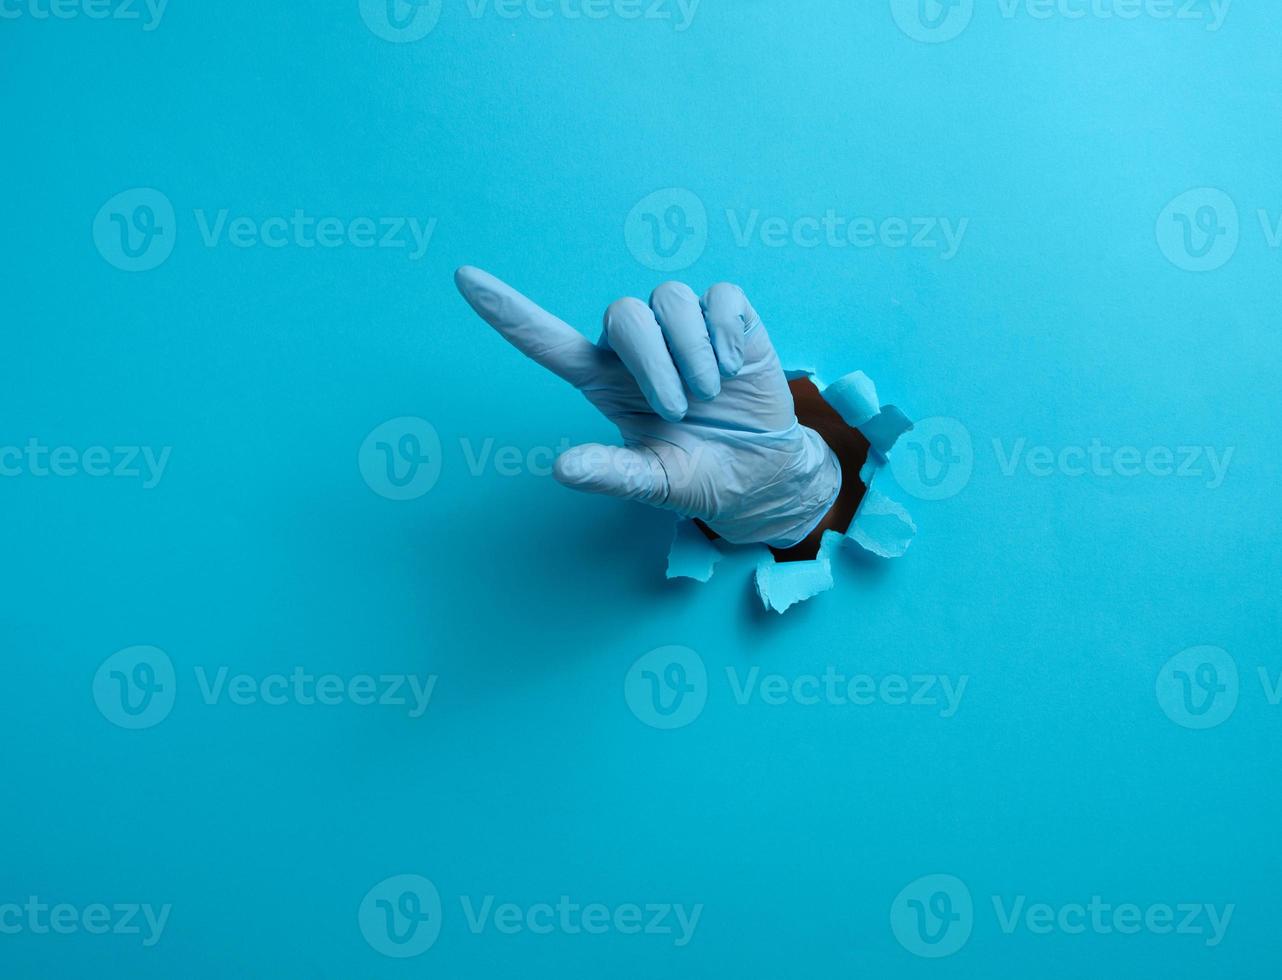 a hand in a blue medical glove is sticking out of a torn hole in a blue paper background, the index finger is raised. Part of the body indicates the direction photo